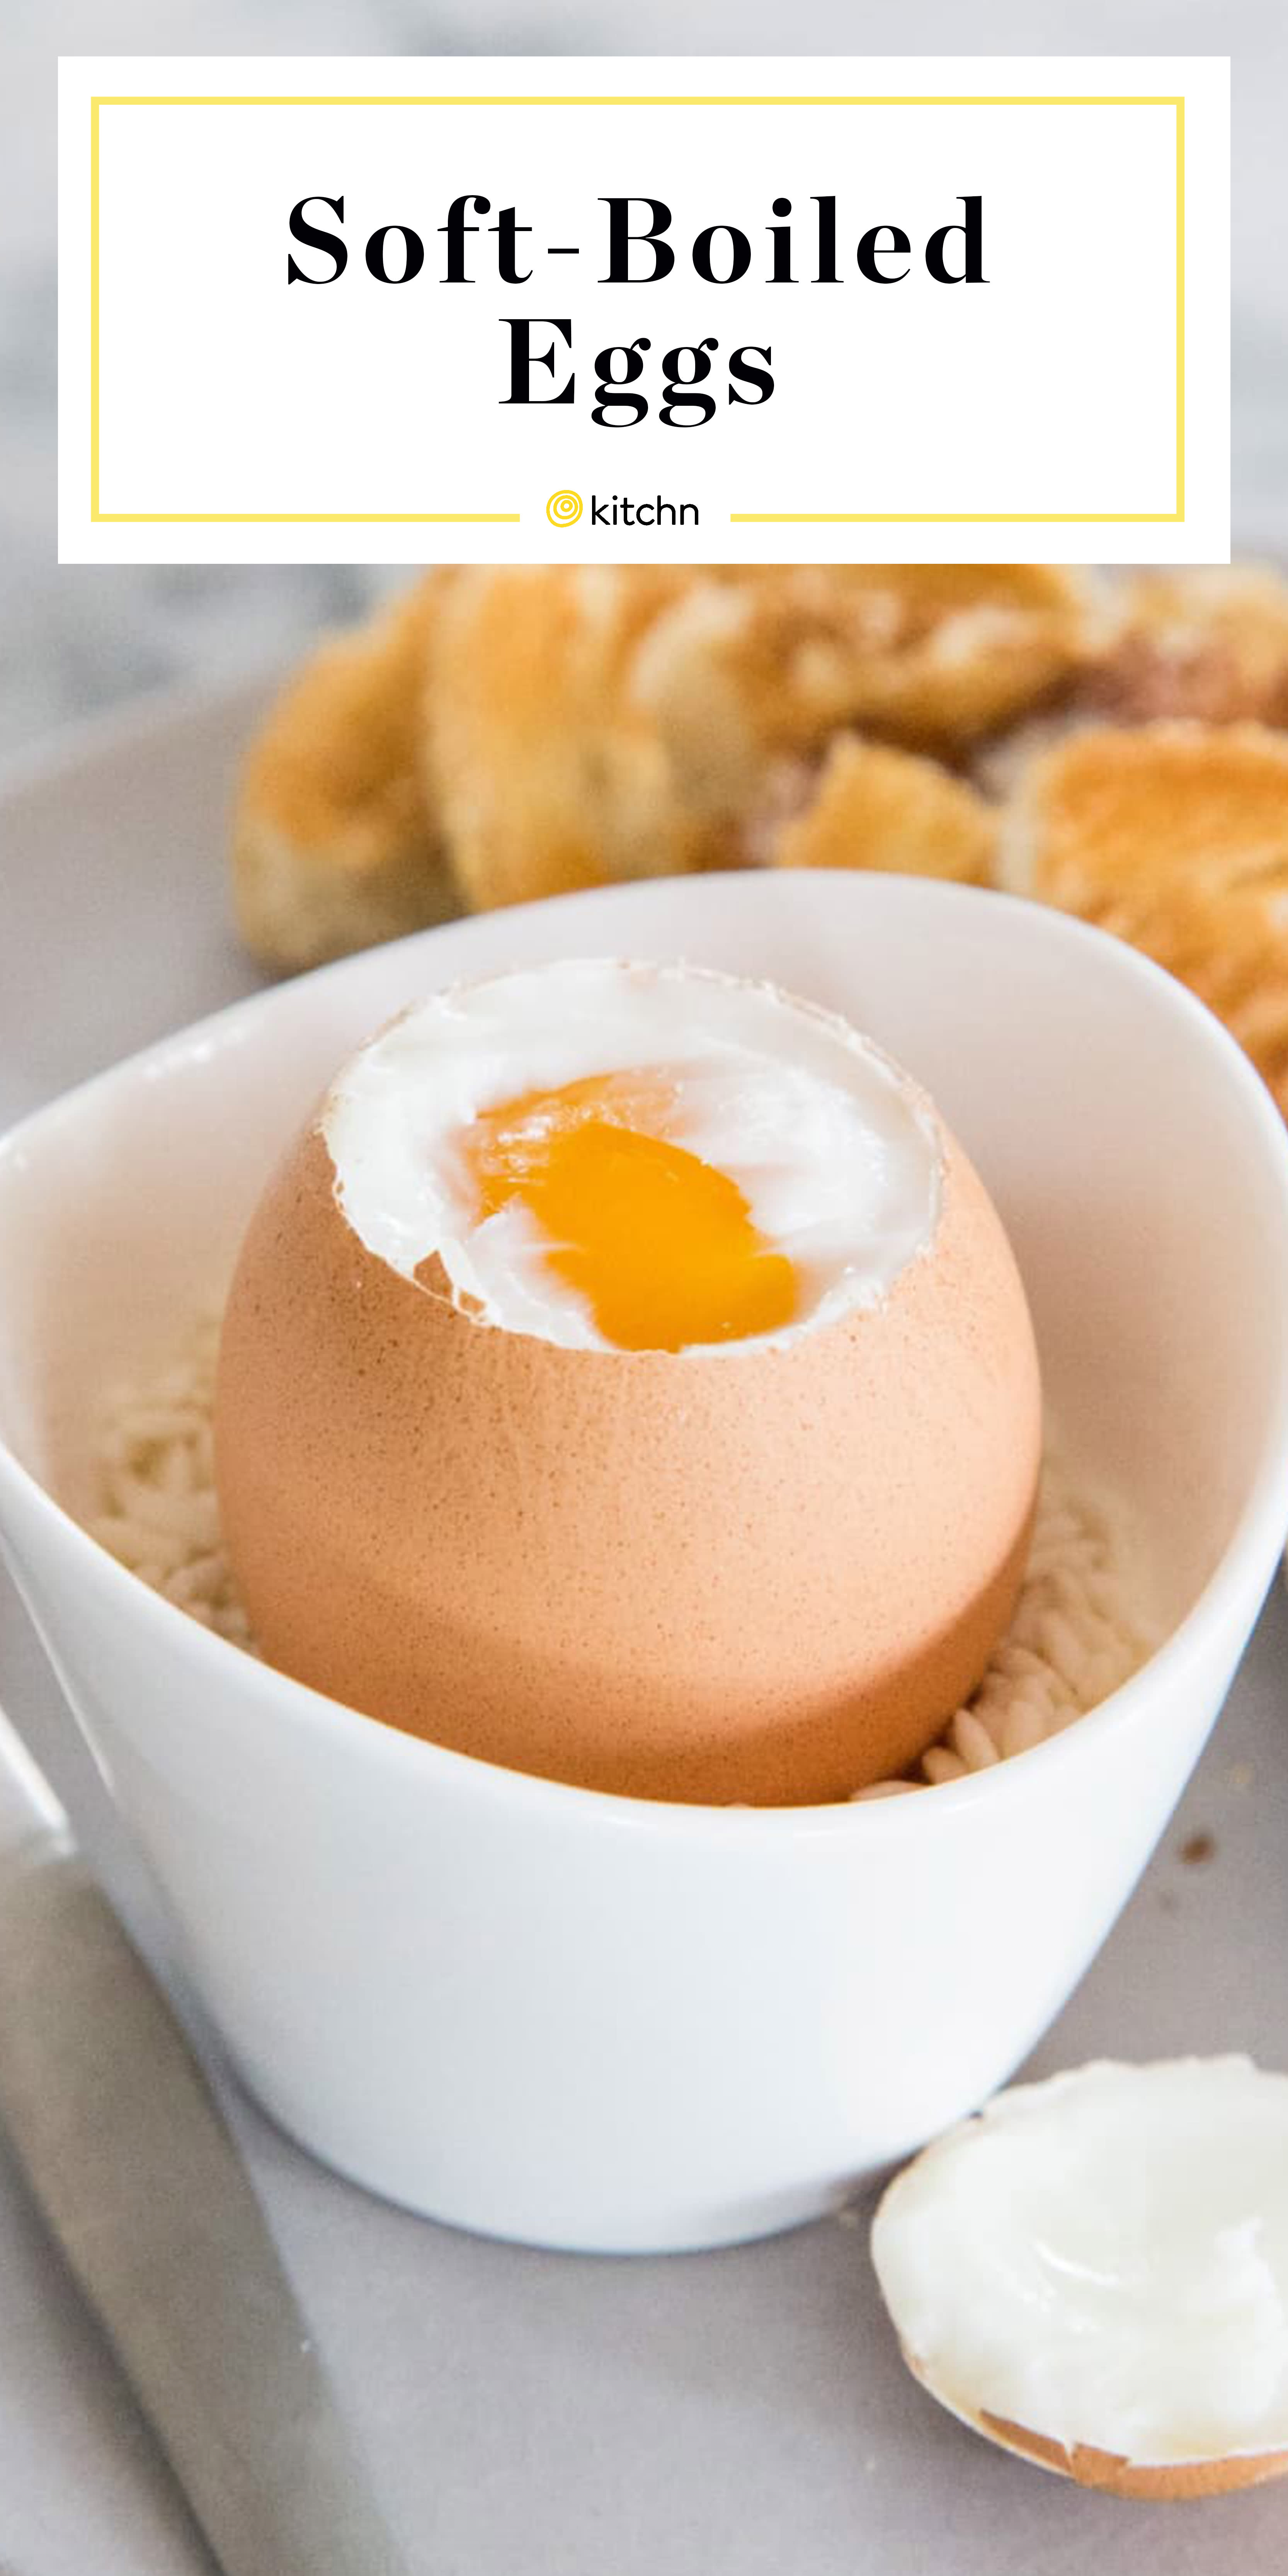 How To Make a Soft Boiled Egg - Step-by-Step Recipe  Kitchn